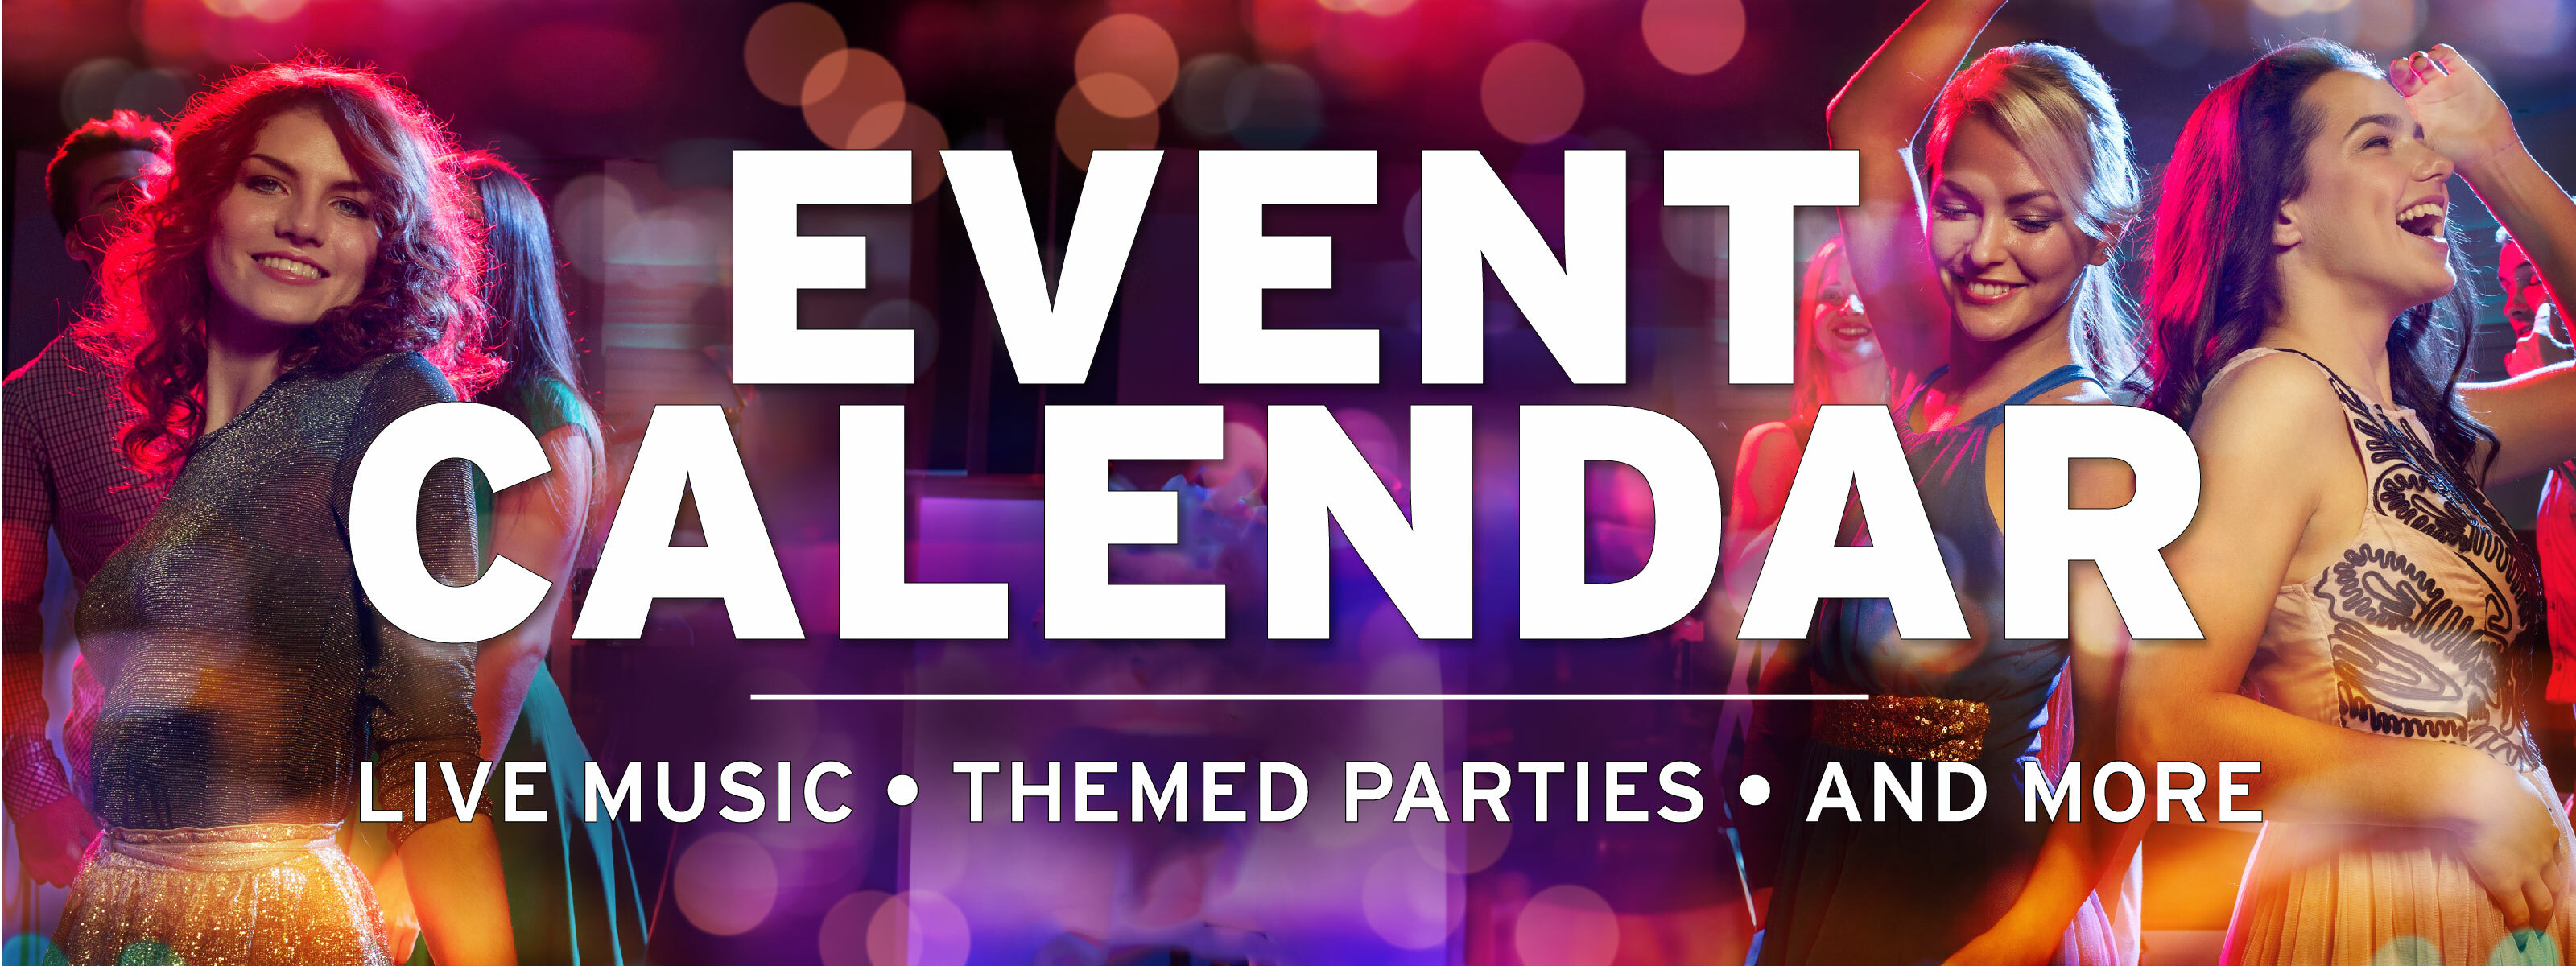 Event Calendar: Live Music, Themed Parties and more